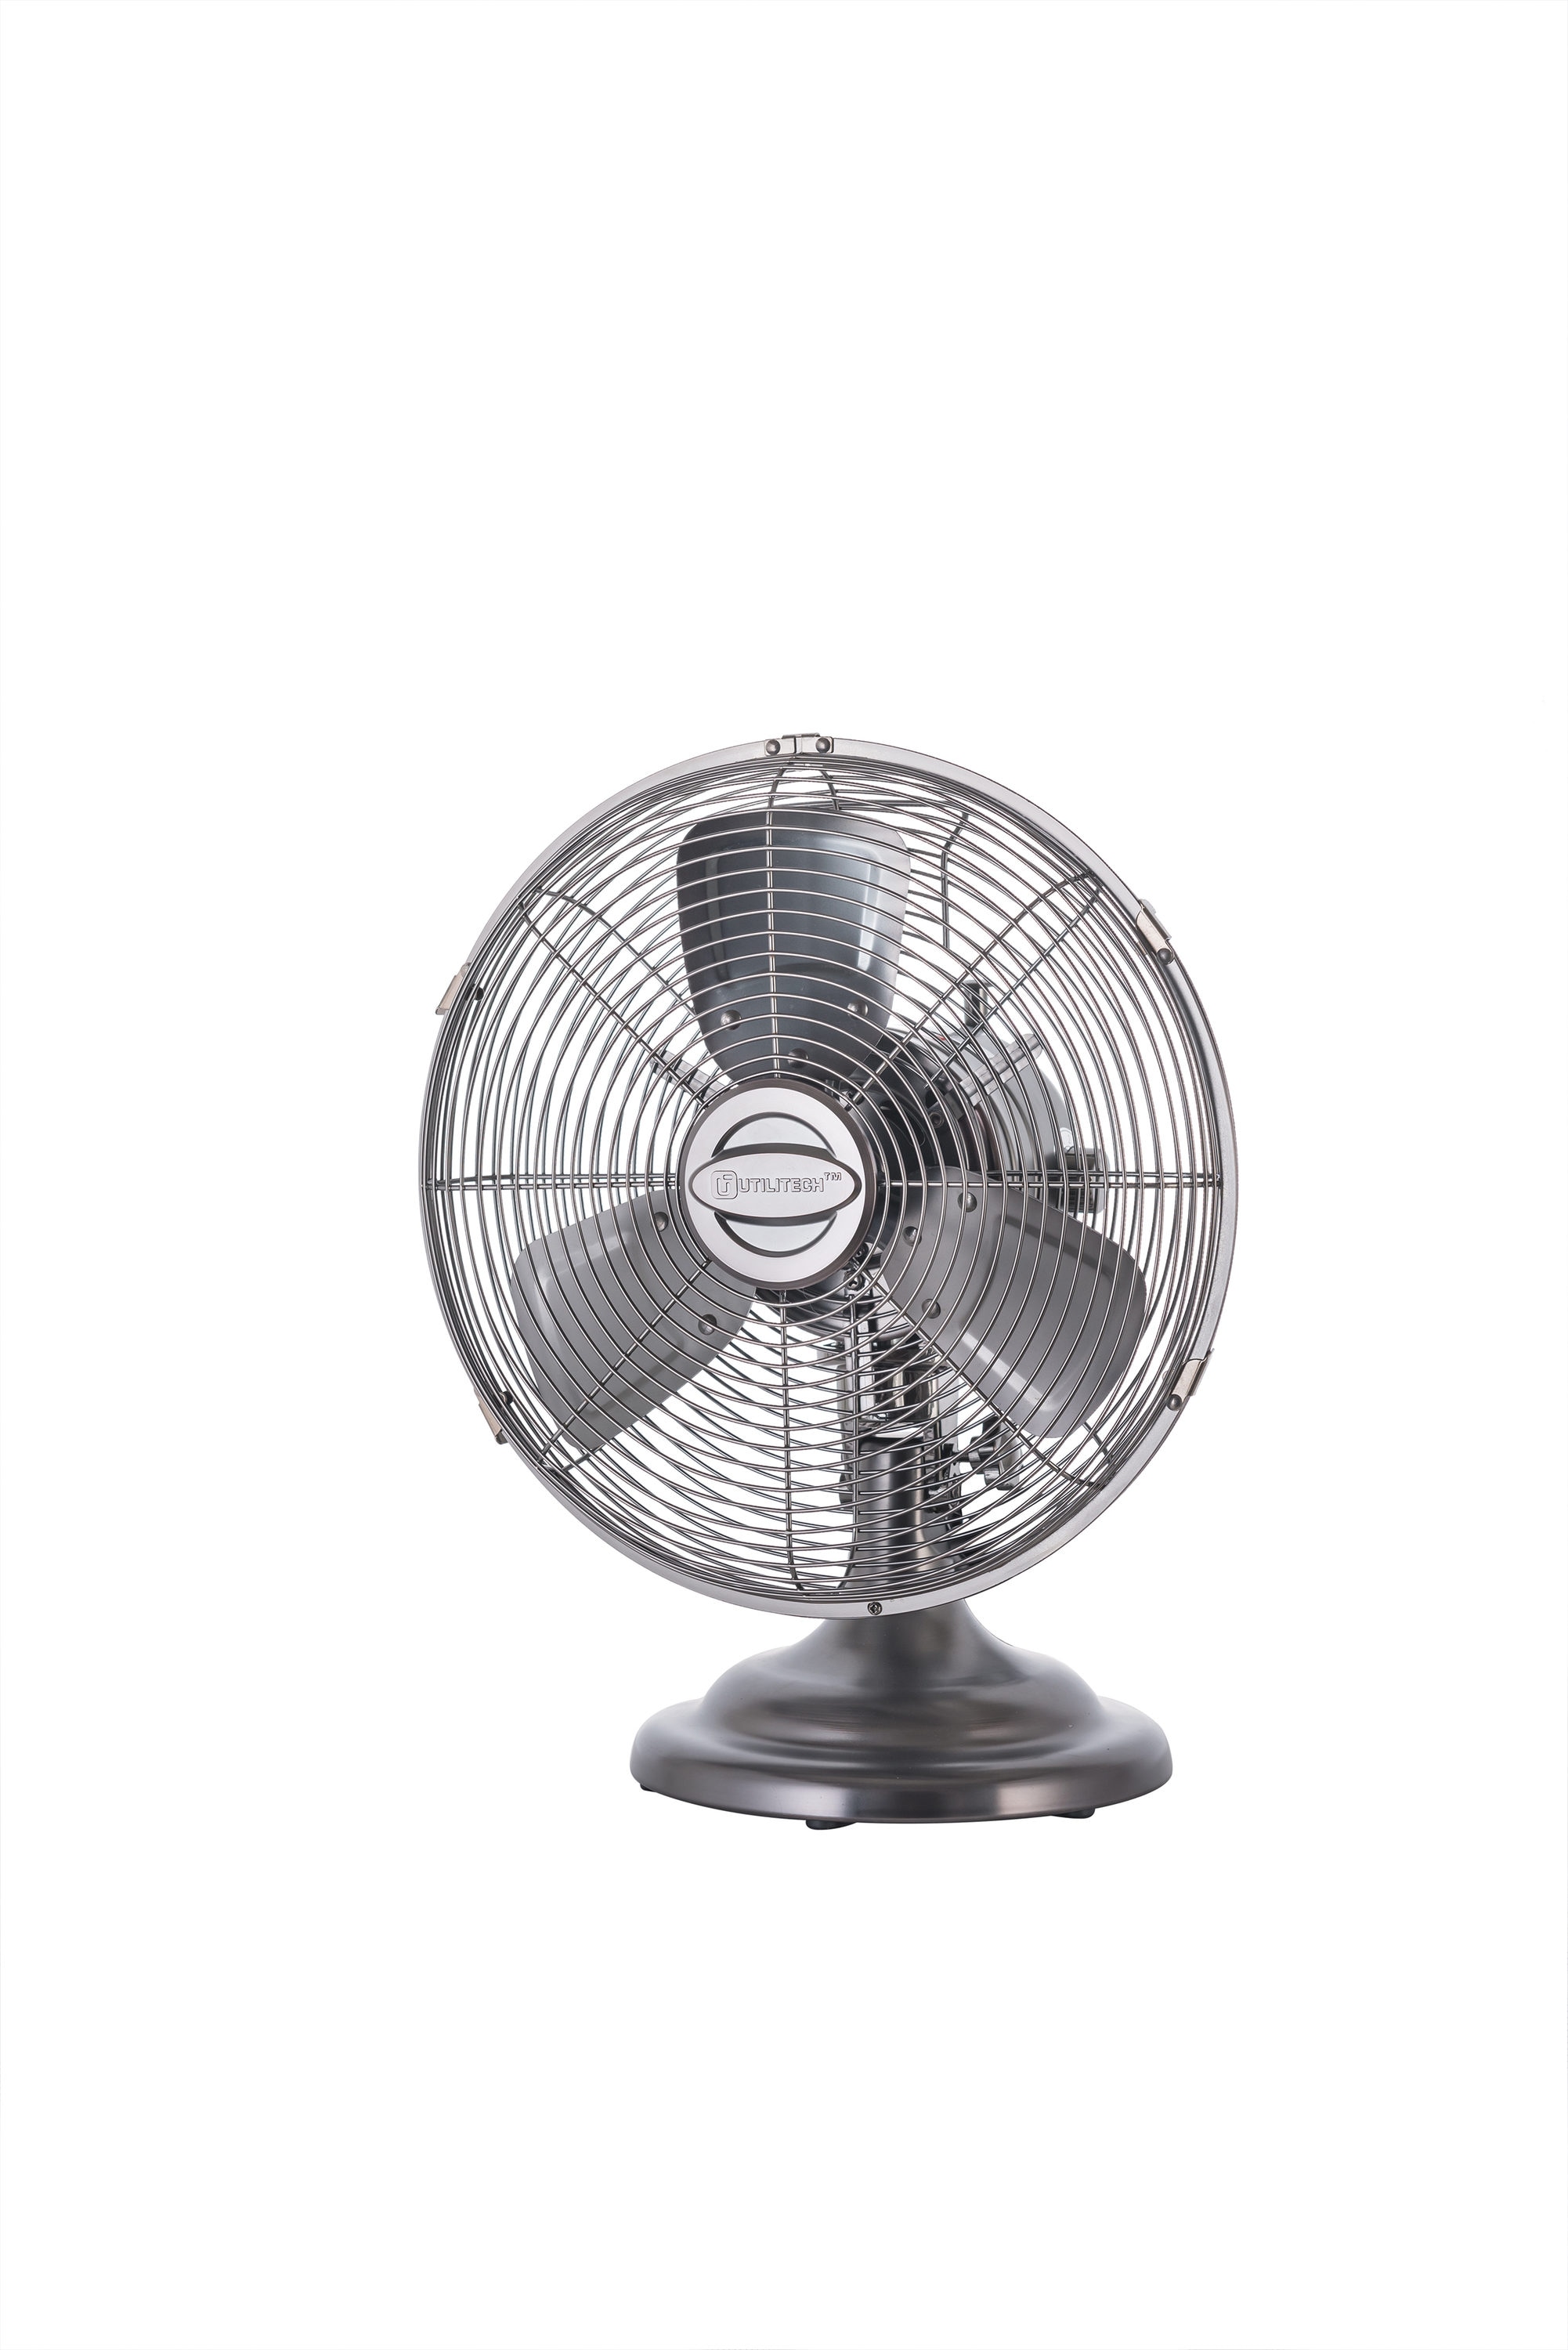 G4RCE 12" CHROME 3 SPEED OSCILLATING FREE-STANDING COOLING DESK TABLE FAN 